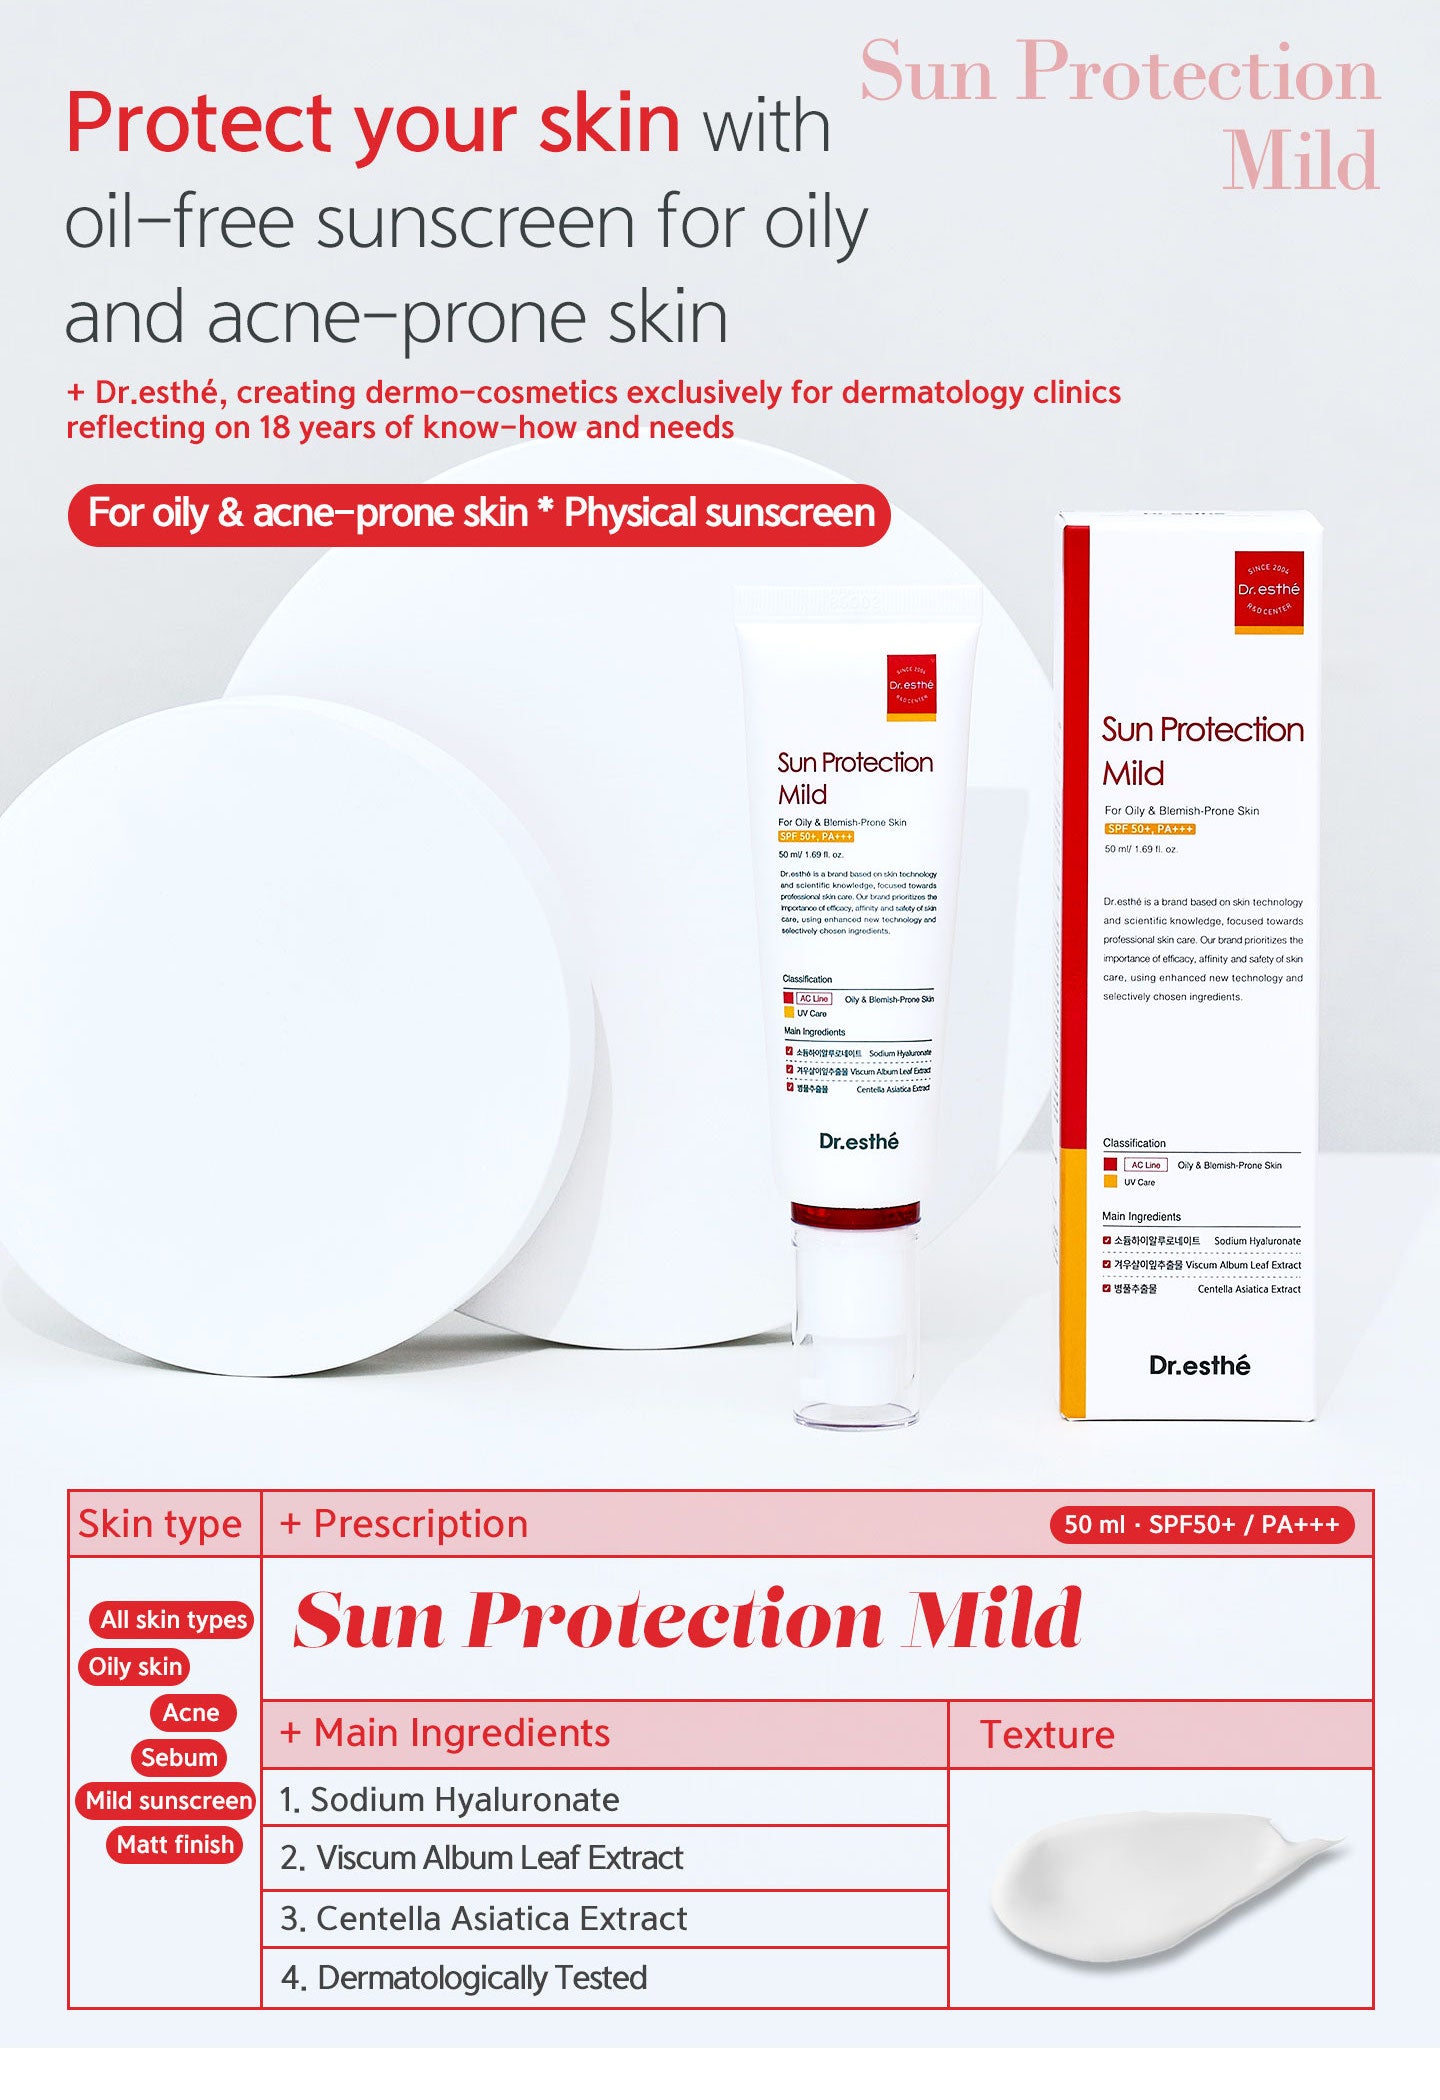 Sun protection mild for oily, acne-prone skin, physical sunscreen. Main ingredient: sodium hyaluronate, viscum album leaf extract, centella asiatica extract. Dermatologically tested. SPF 50+ PA+++